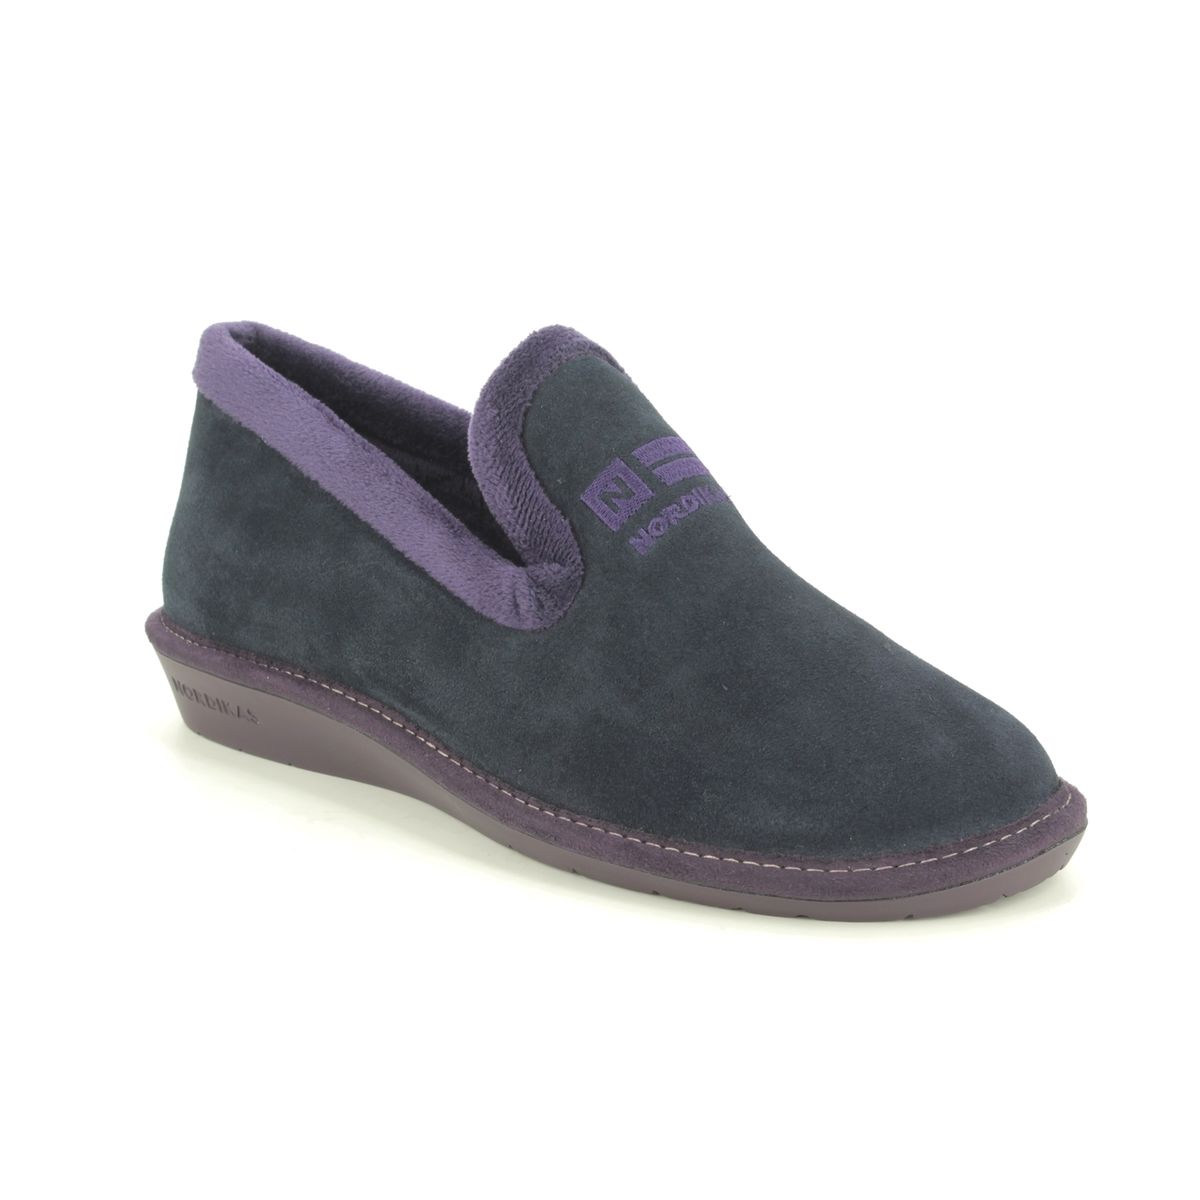 Nordikas Tabackin Navy Suede Womens Slippers 305-4   Nicola 3 In Size 36 In Plain Navy Suede